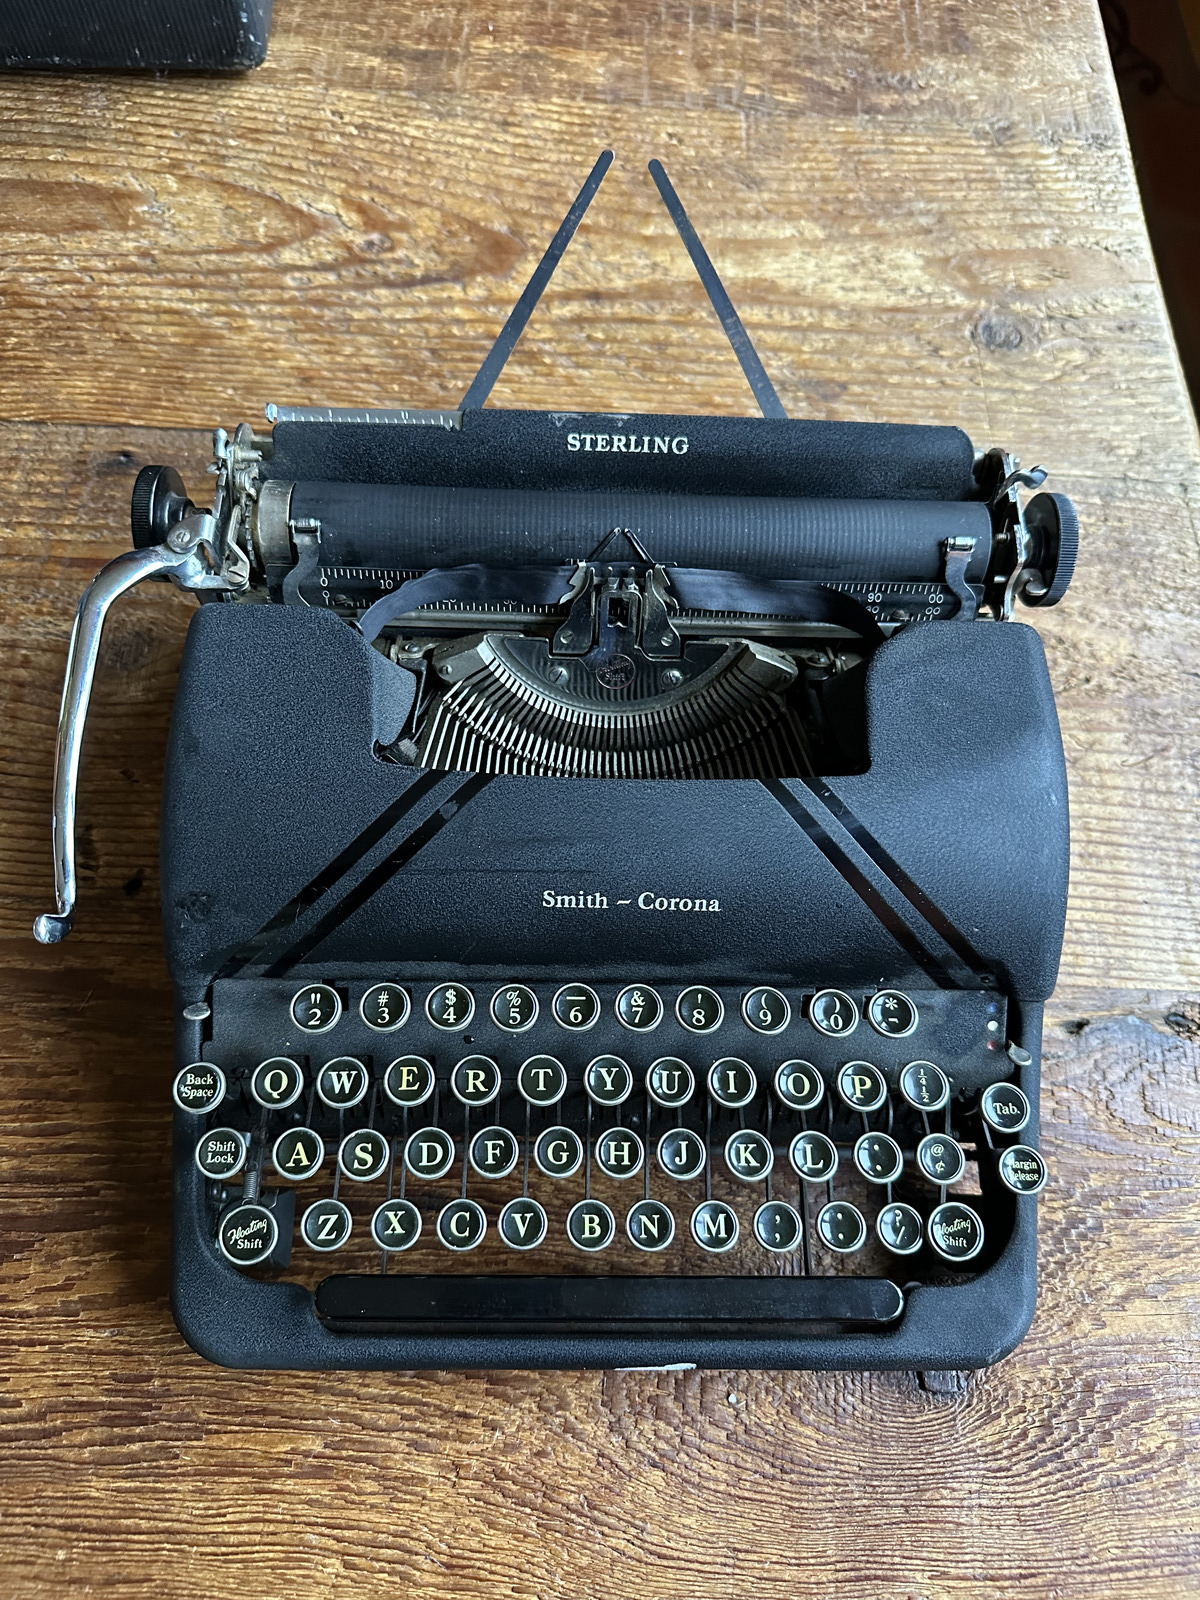 Smith Corona Manual Typewriter  Sterling Series 4A 1945(?) with Hard Case  